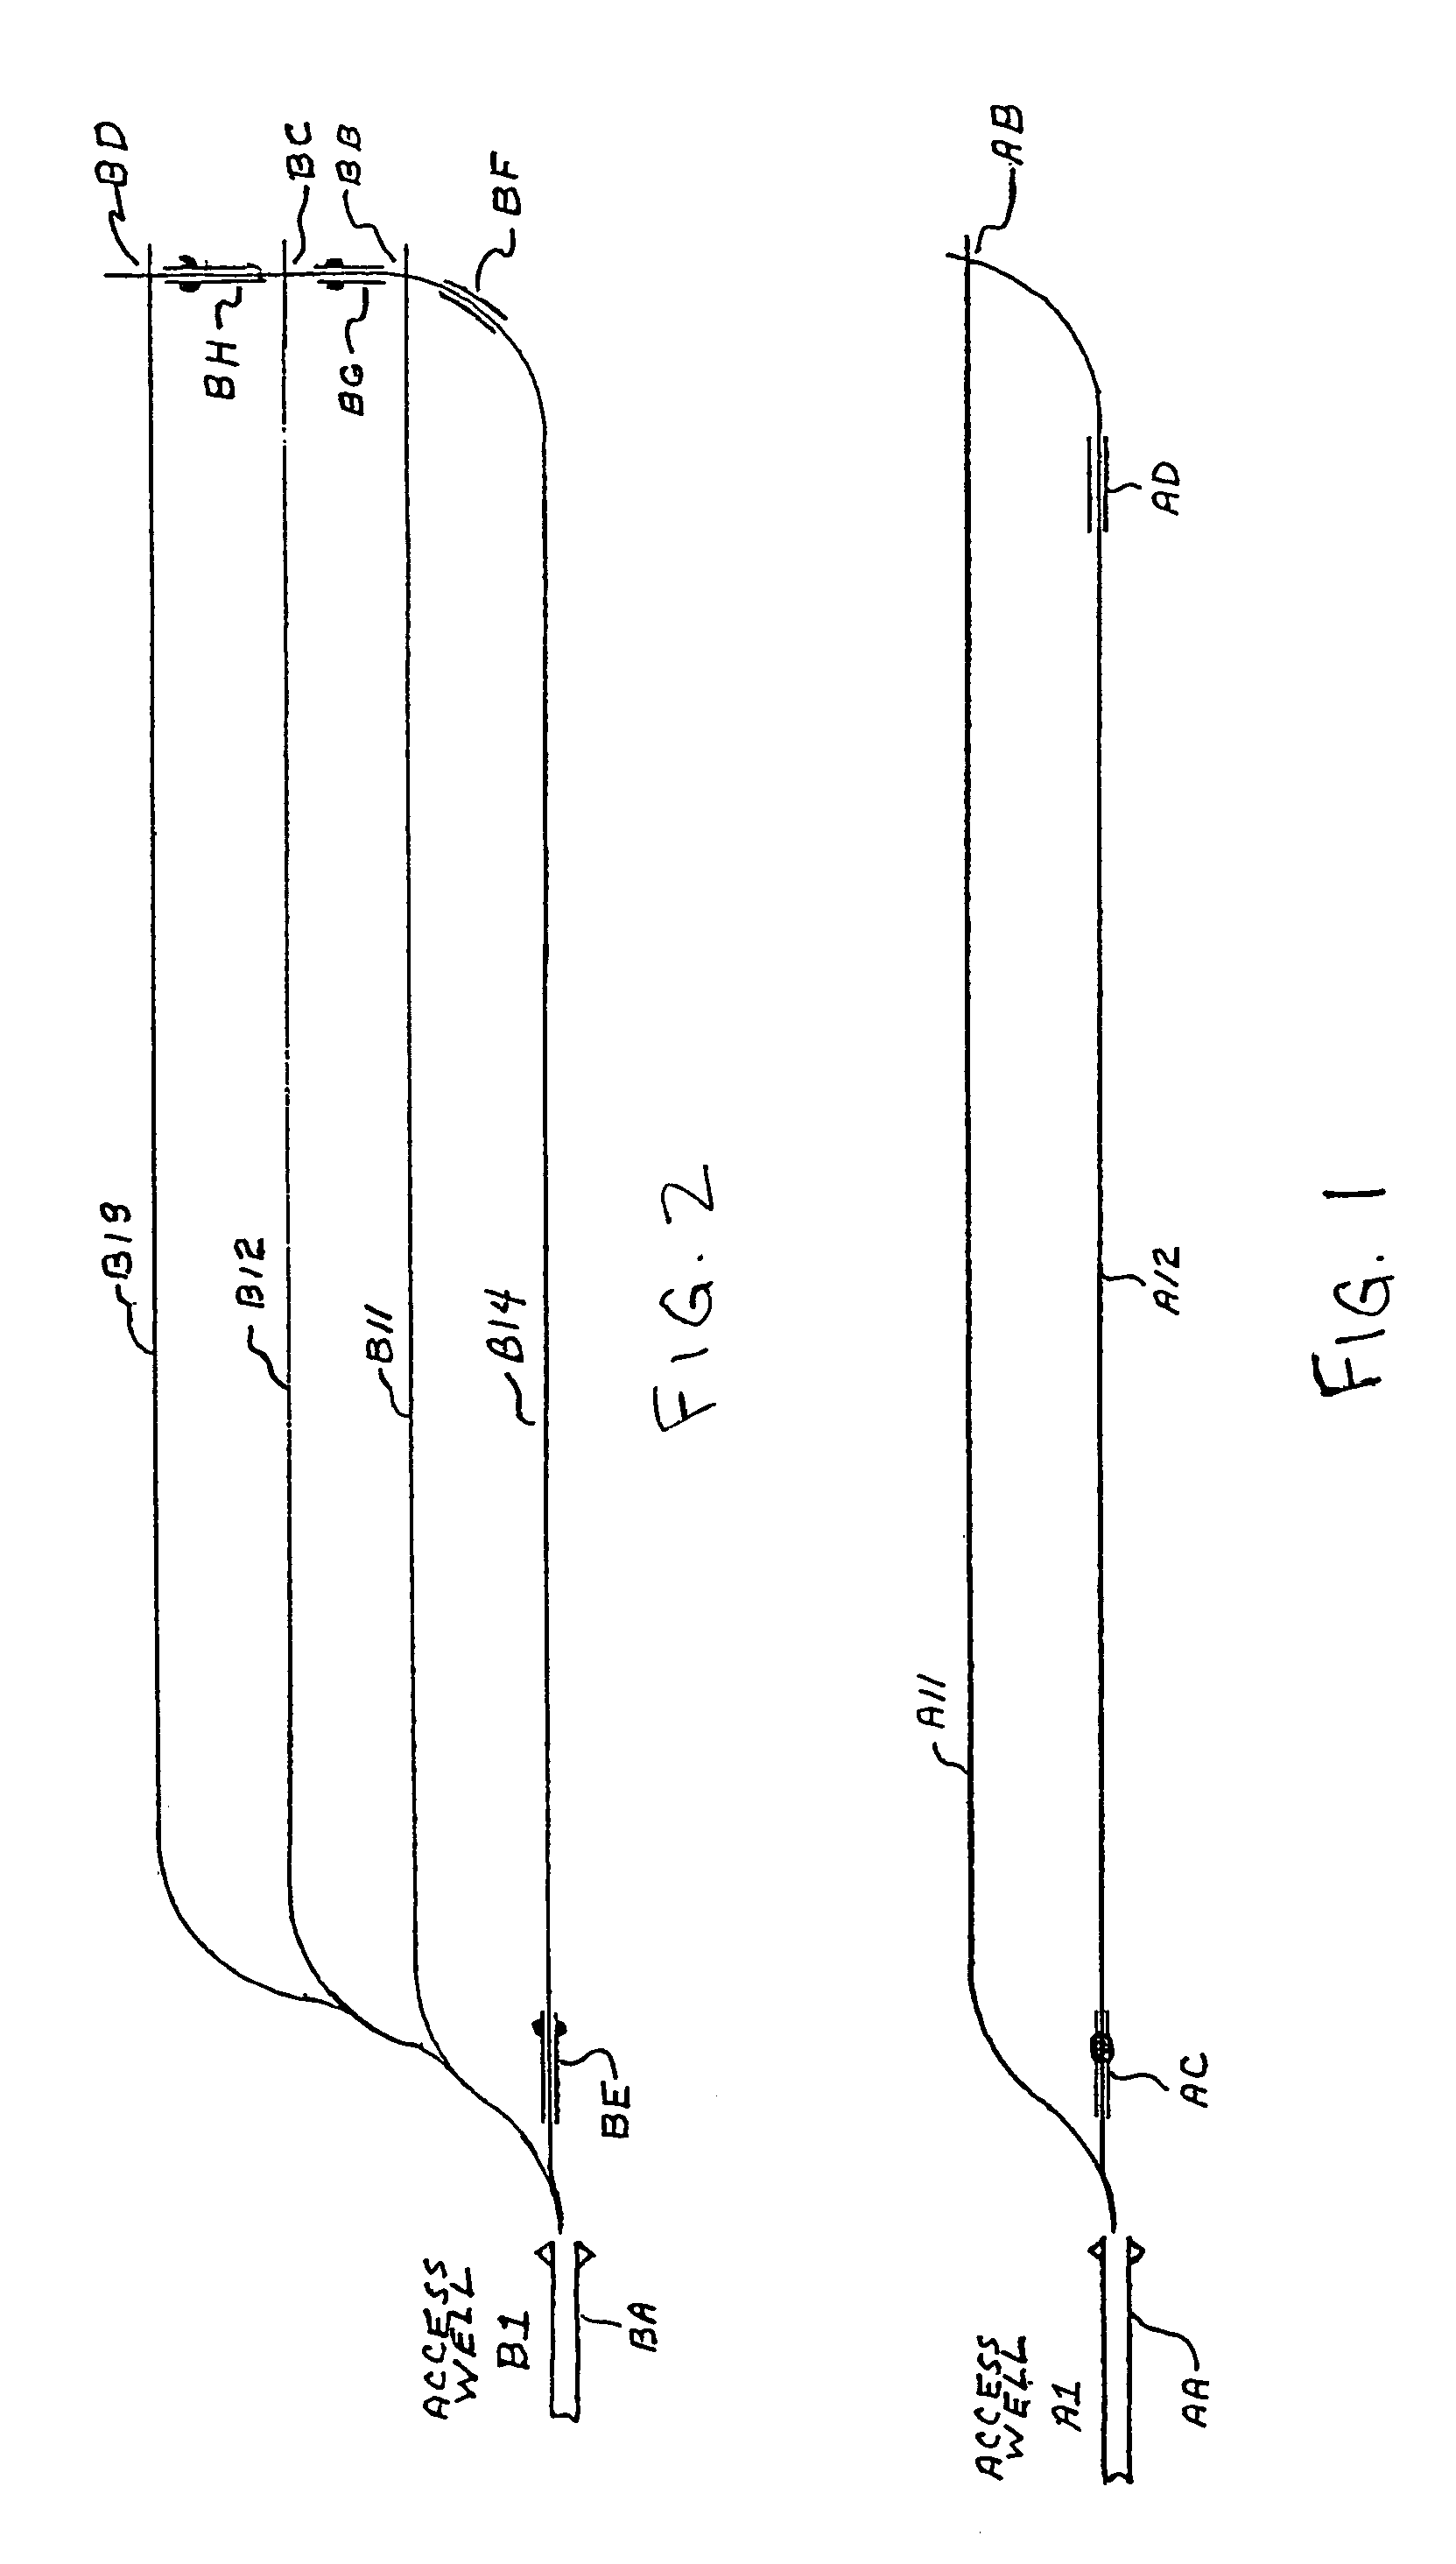 Methods for constructing underground borehole configurations and related solution mining methods